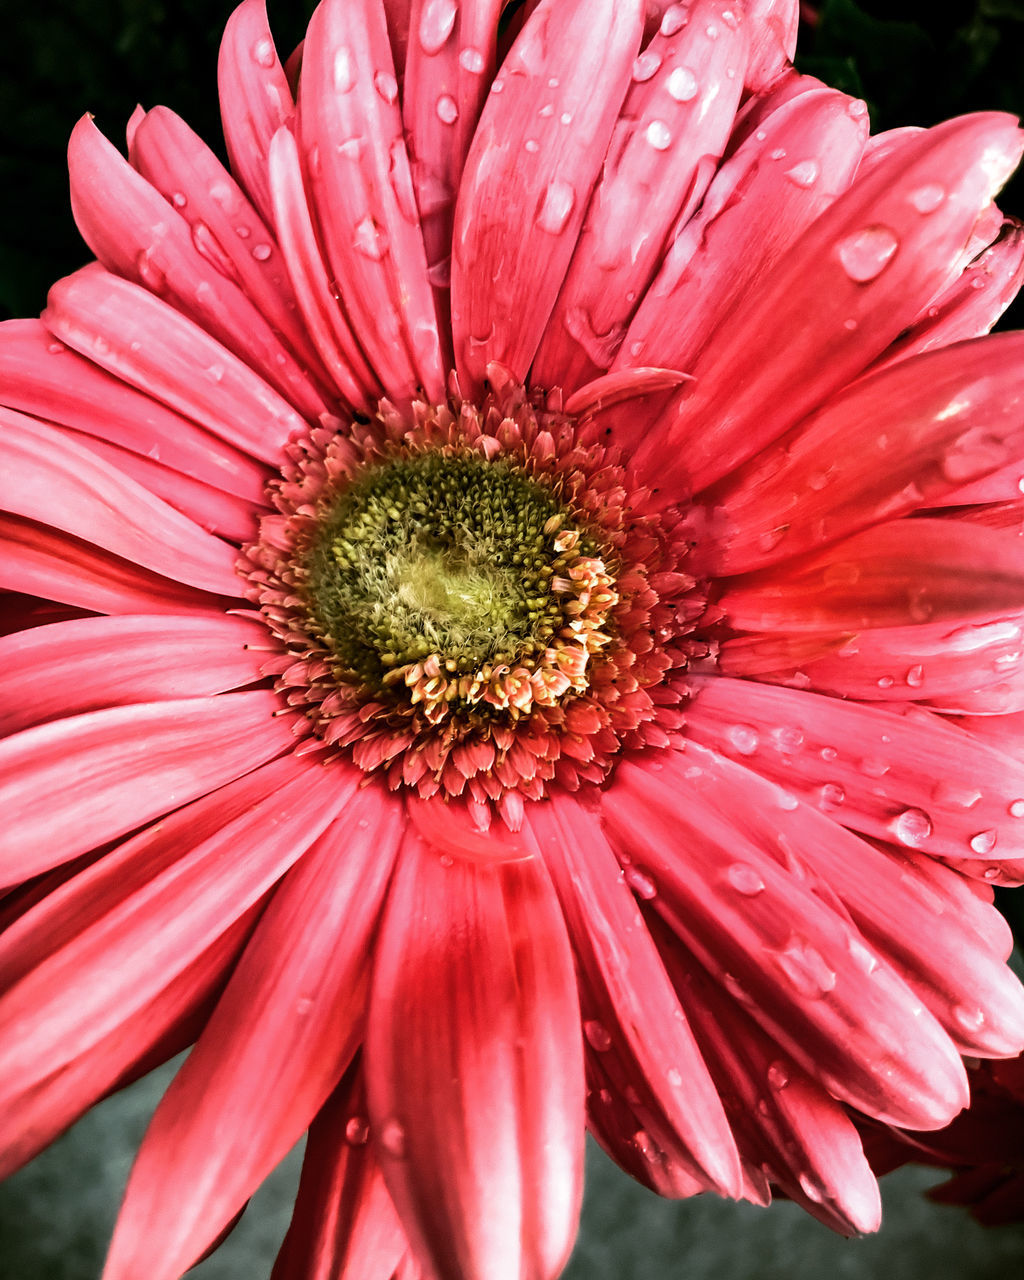 flower, flowering plant, plant, freshness, petal, flower head, inflorescence, beauty in nature, fragility, growth, close-up, pollen, pink, nature, daisy, macro photography, gerbera daisy, plant stem, no people, outdoors, focus on foreground, red, day, botany, drop, stamen, water, wet